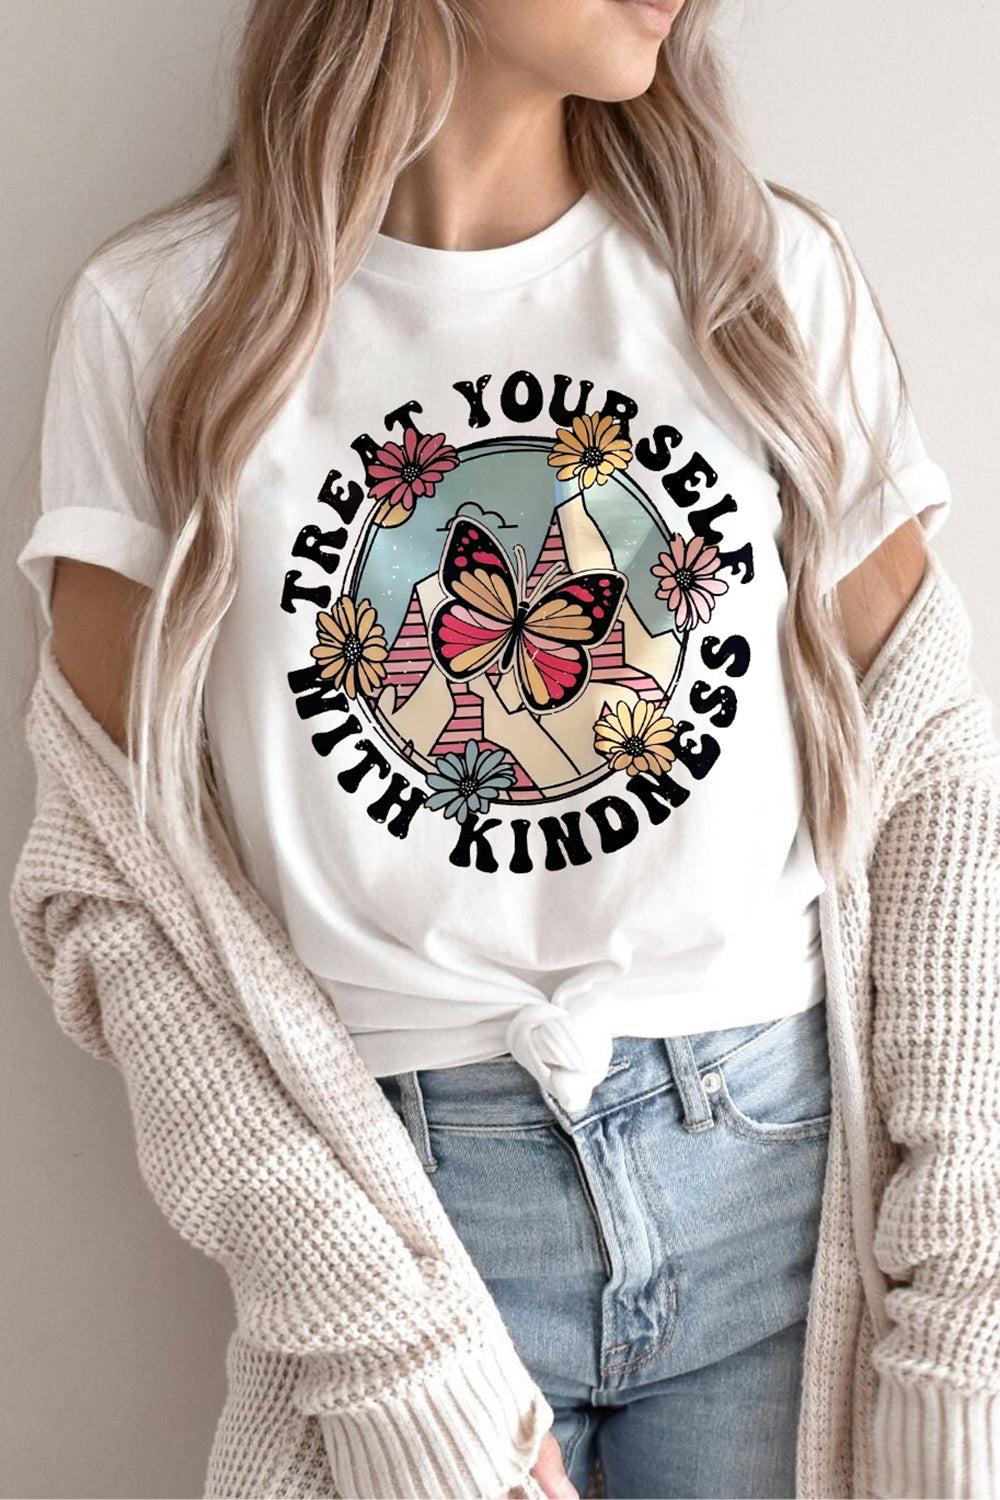 Treat Yourself With Kindness T-shirt For Women